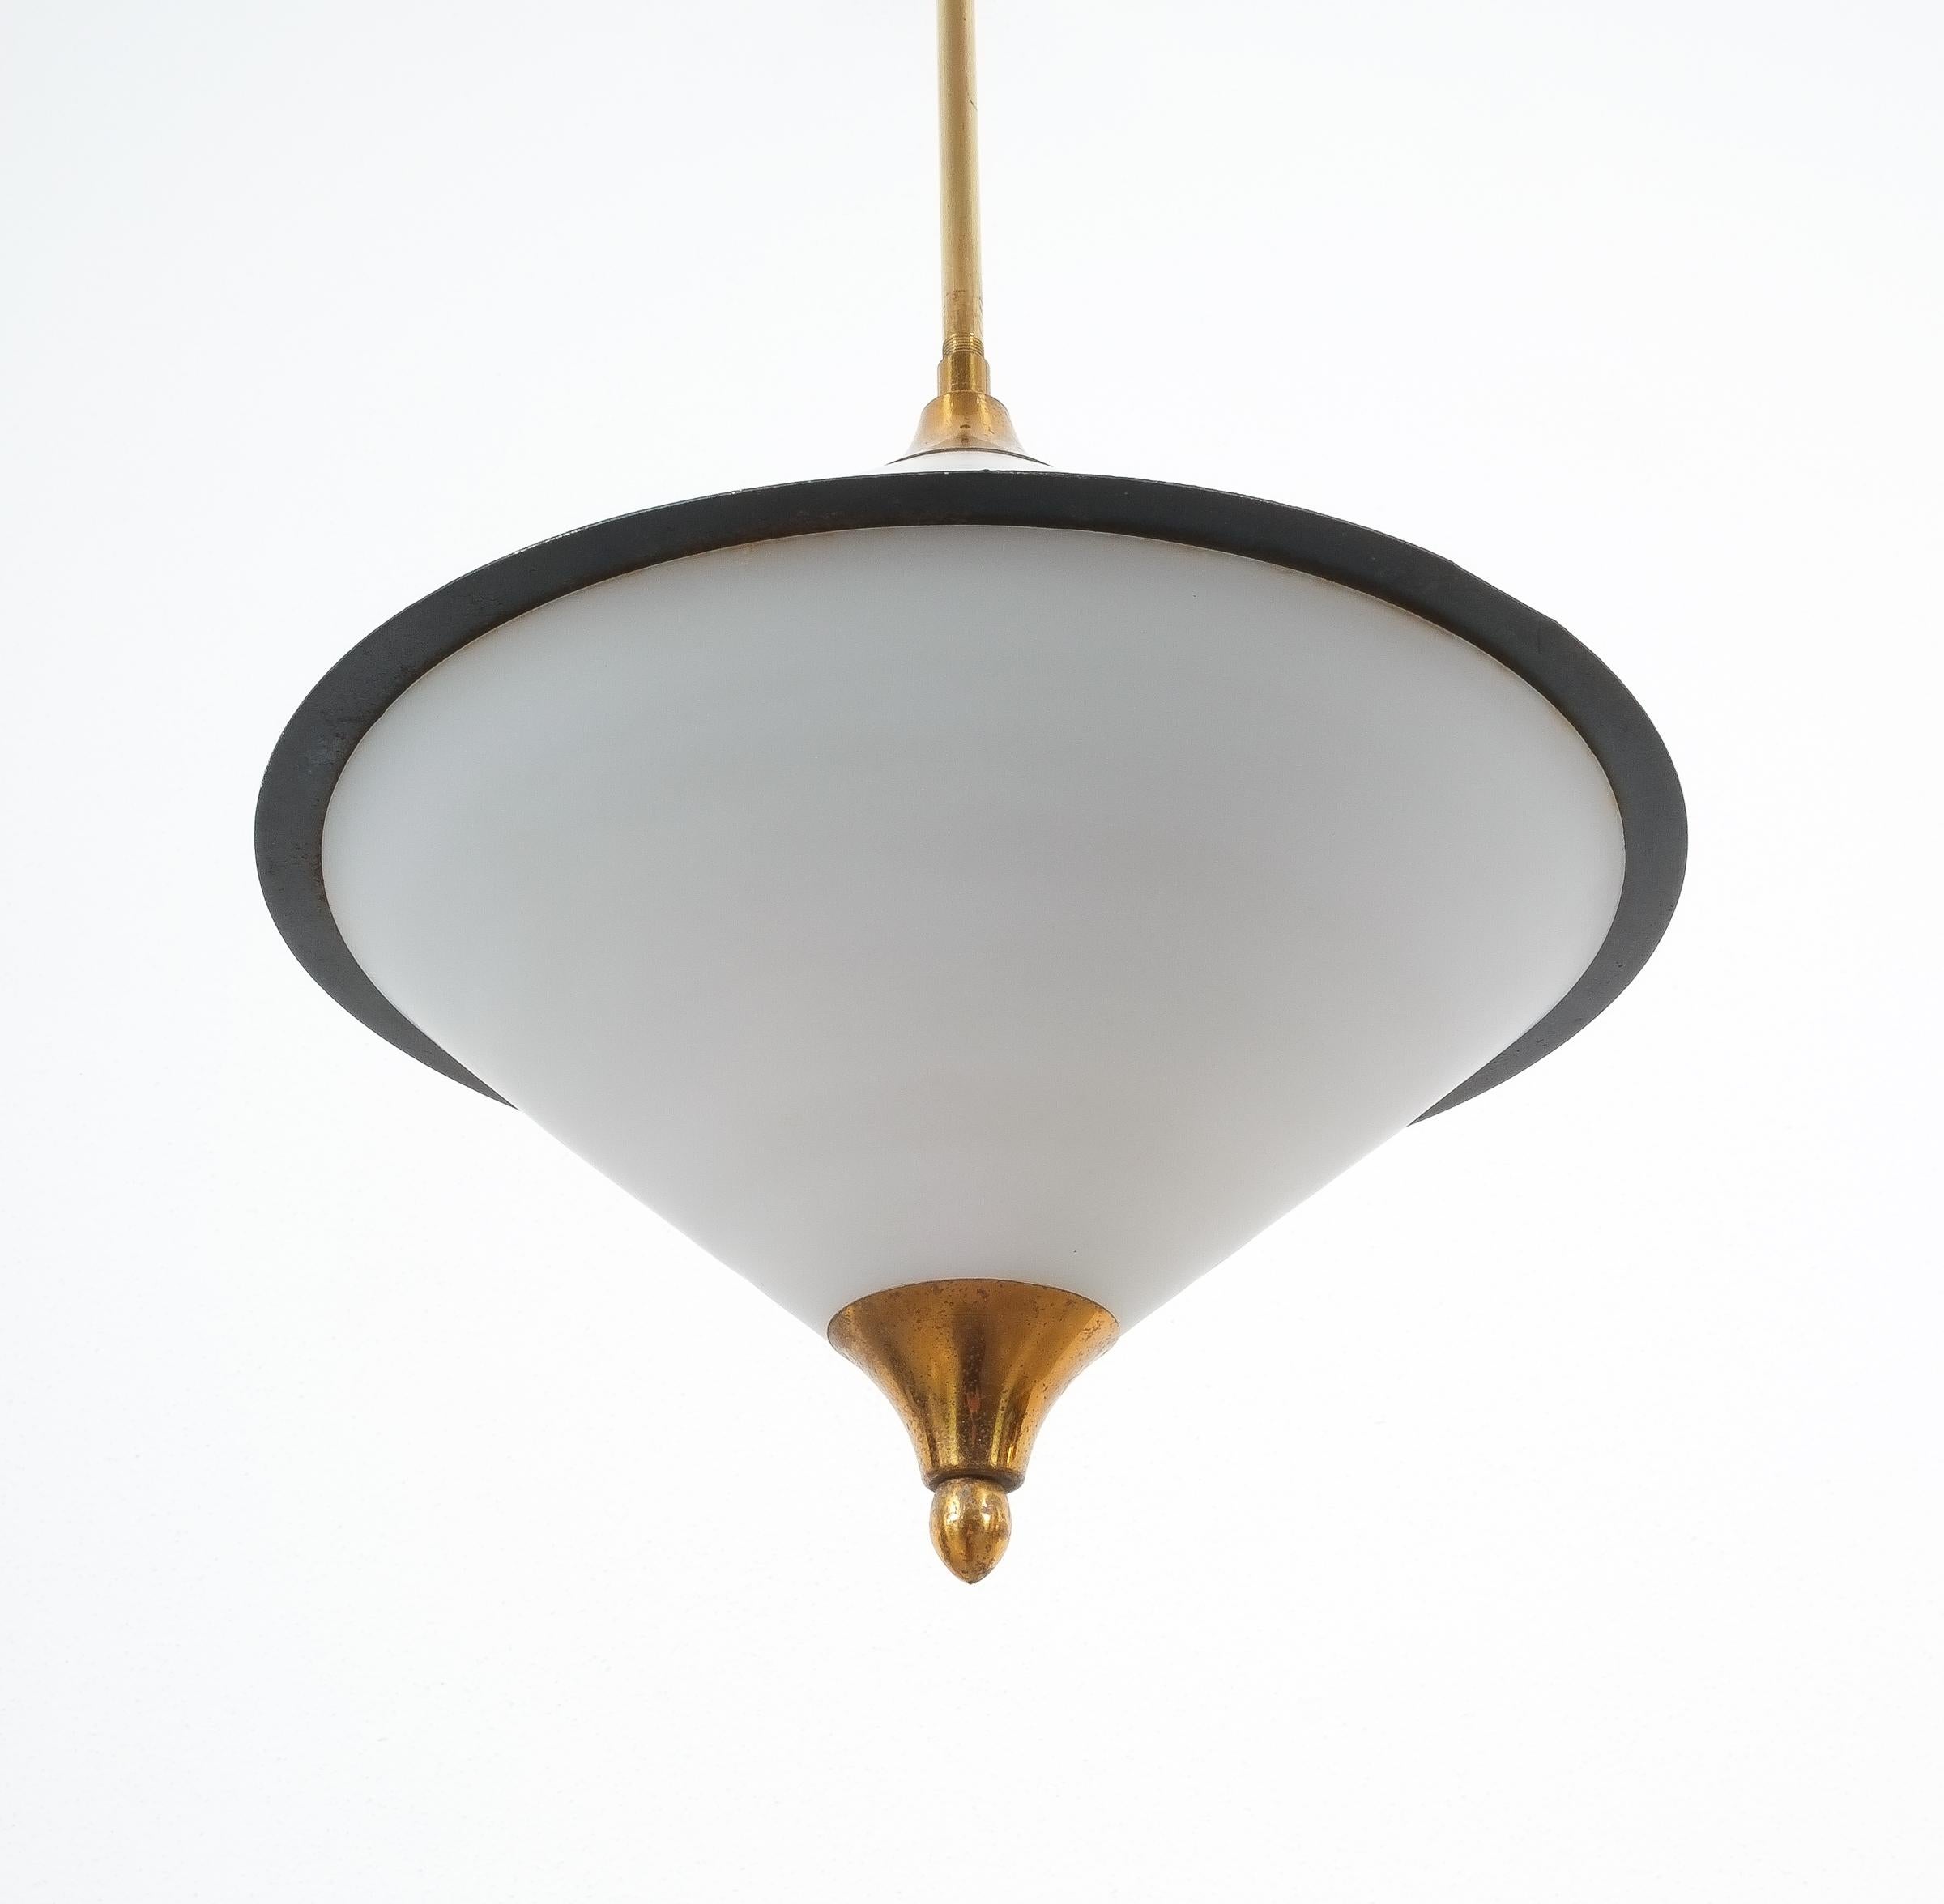 Blackened Rare Spin Top Shaped Pendant Lamp Opal Glass Attributed to Lelli, circa 1950 For Sale